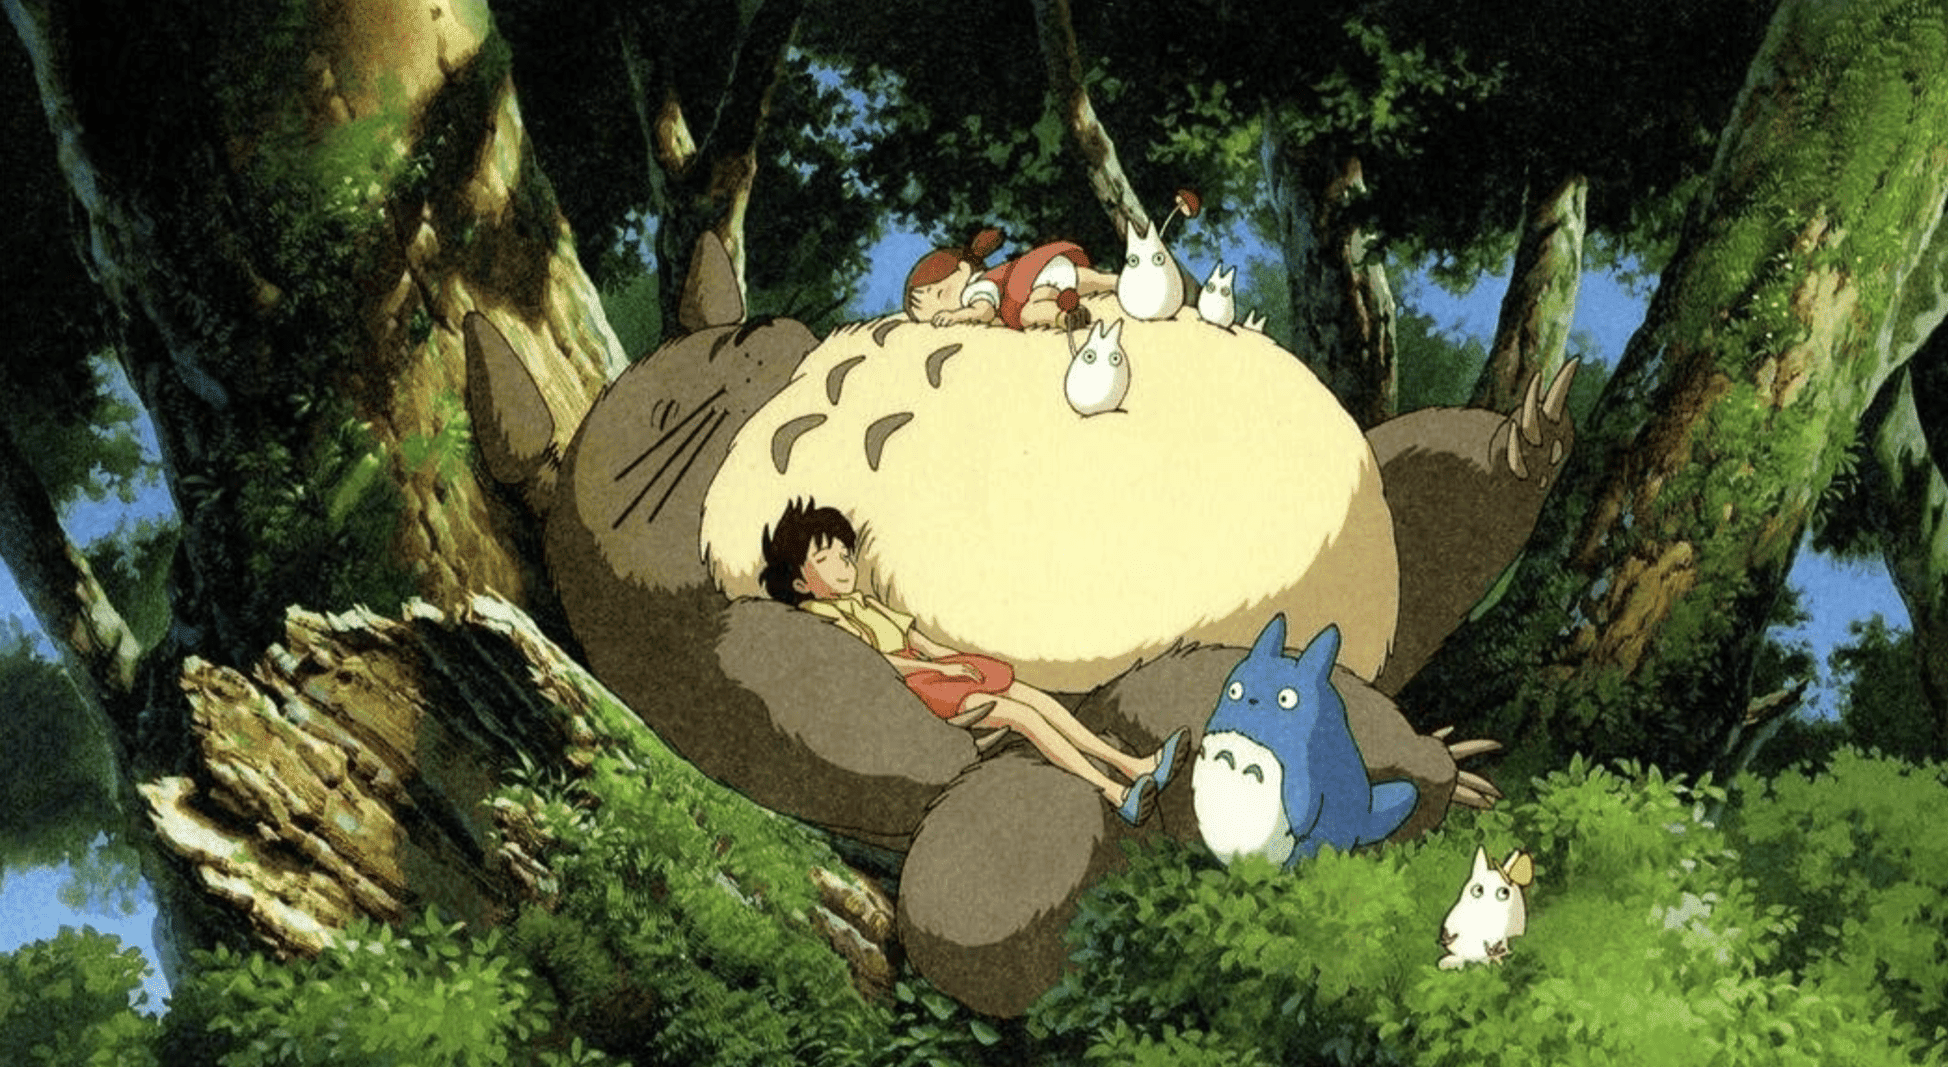 Two kids and half a dozen furry forest sprites take a nap in this still from Studio Ghibli.